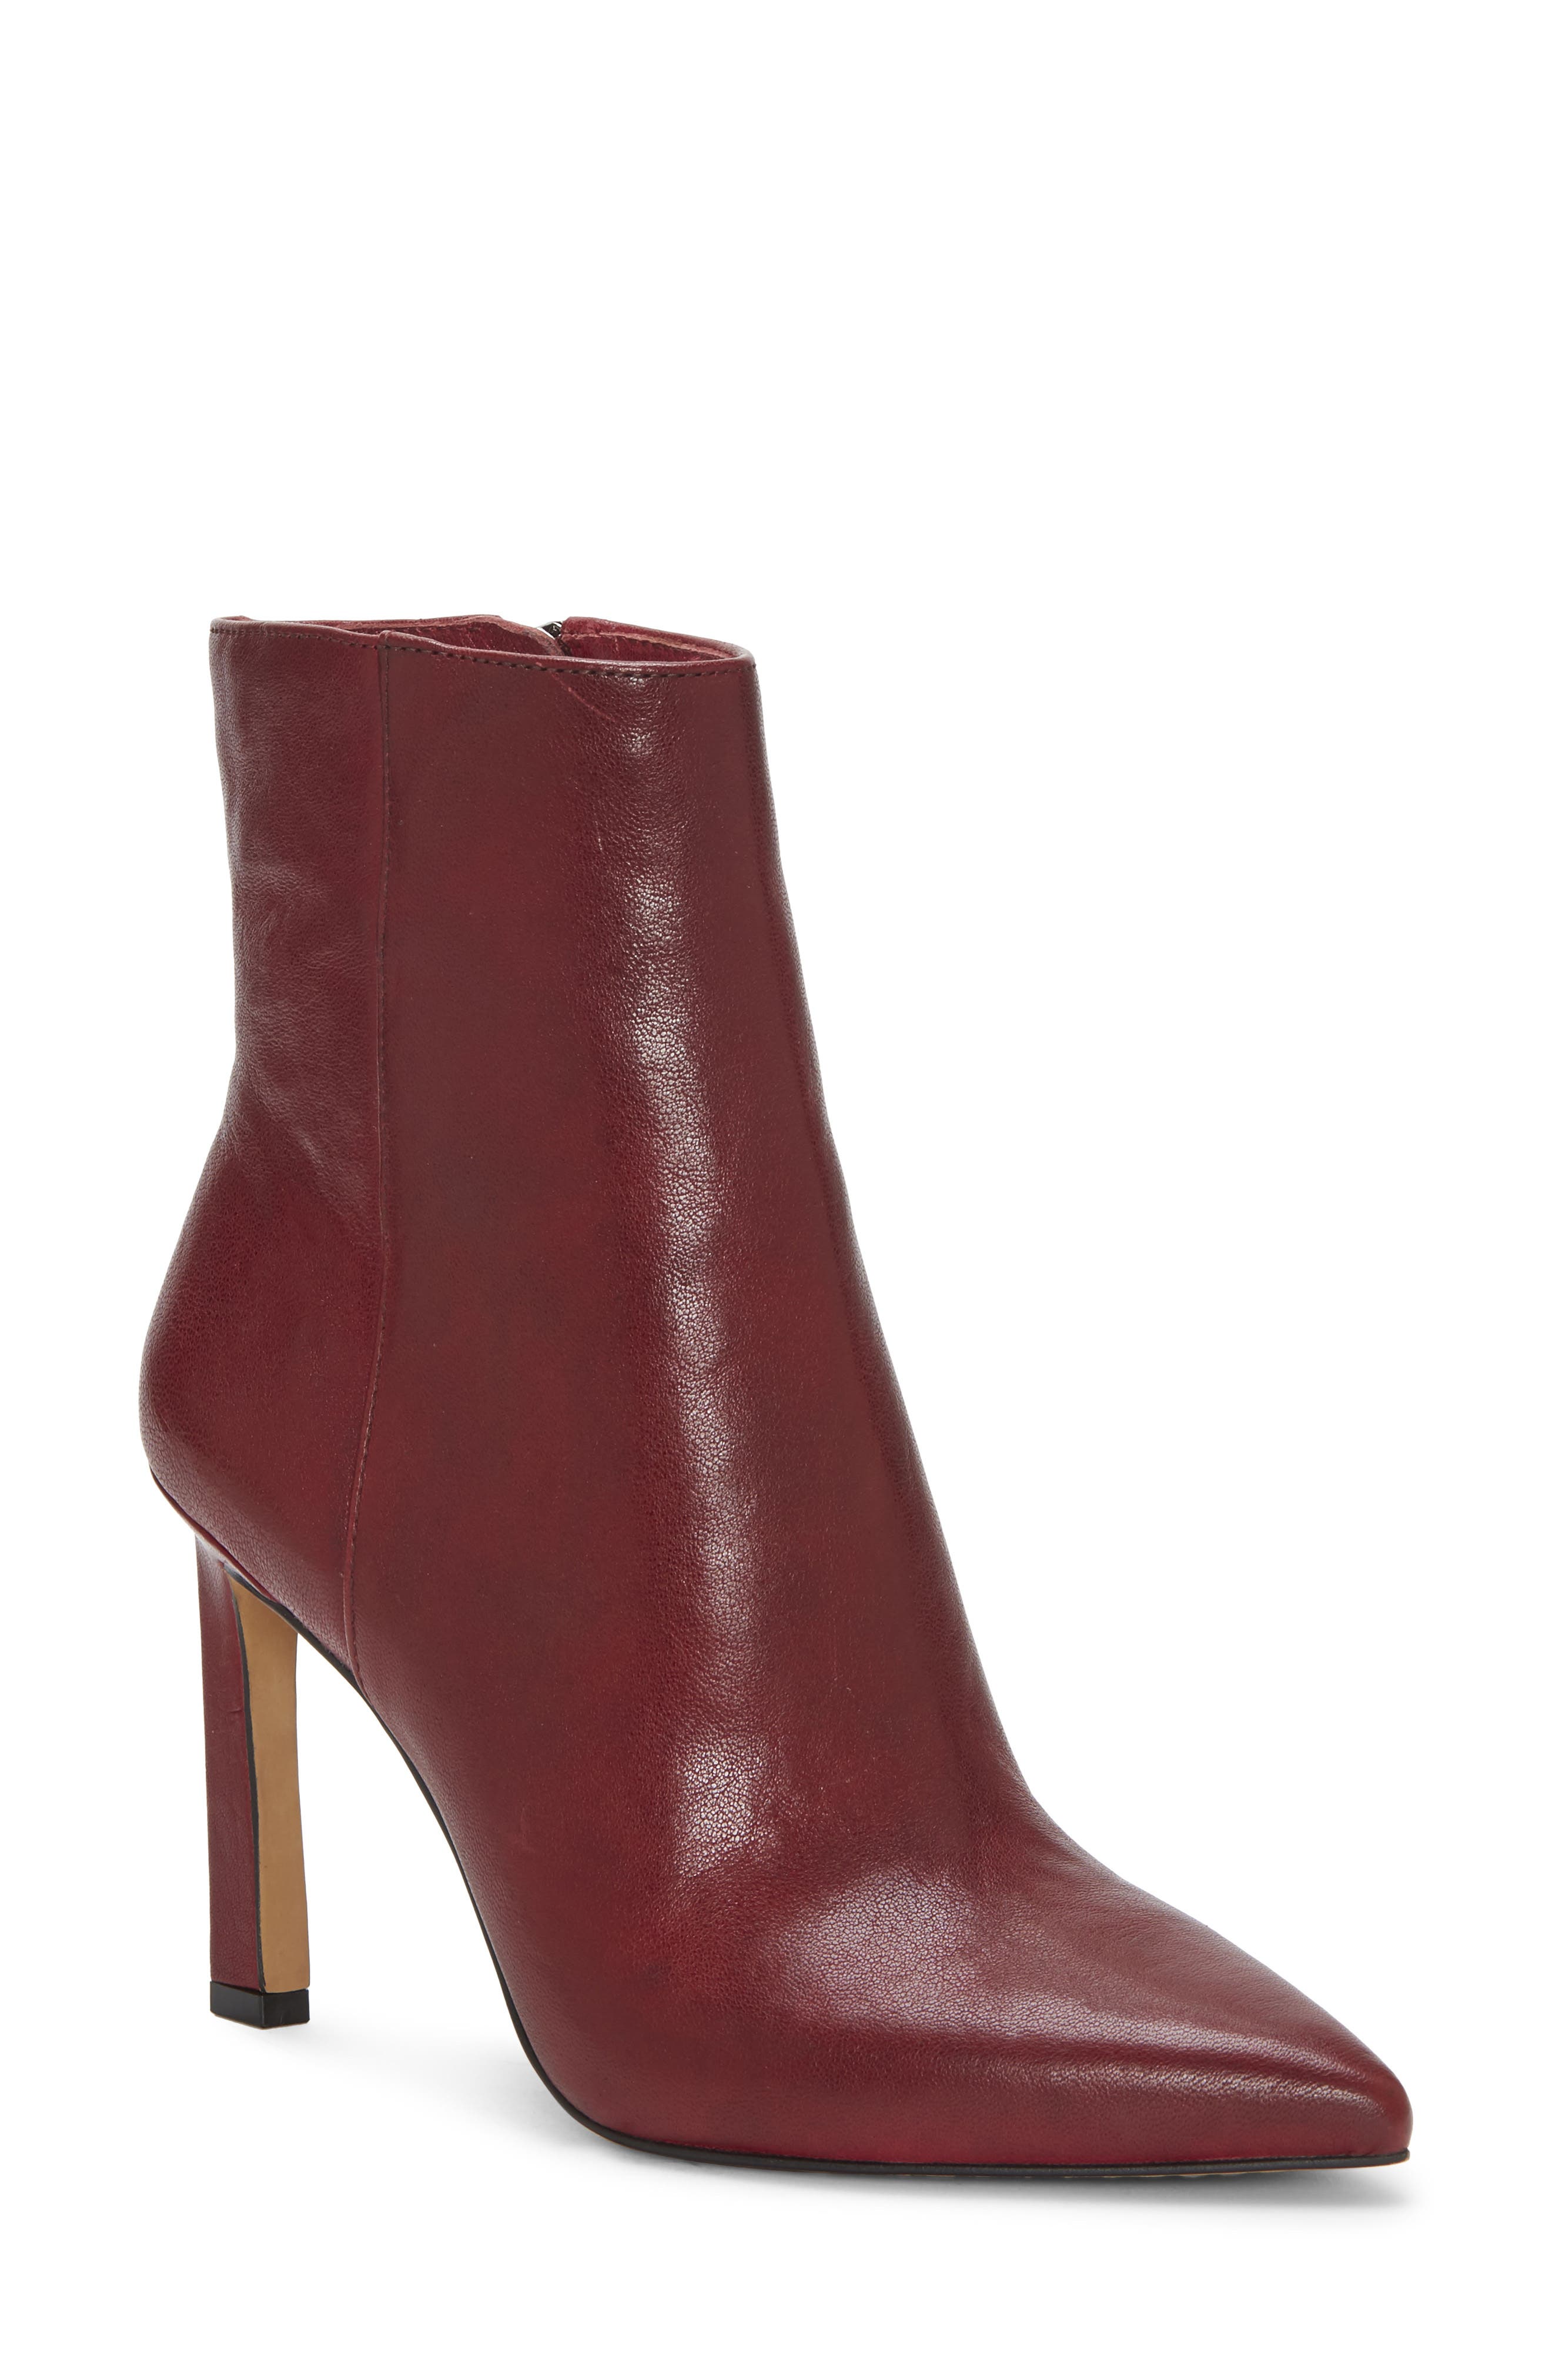 Vince Camuto Sashala Pointed Toe Bootie 